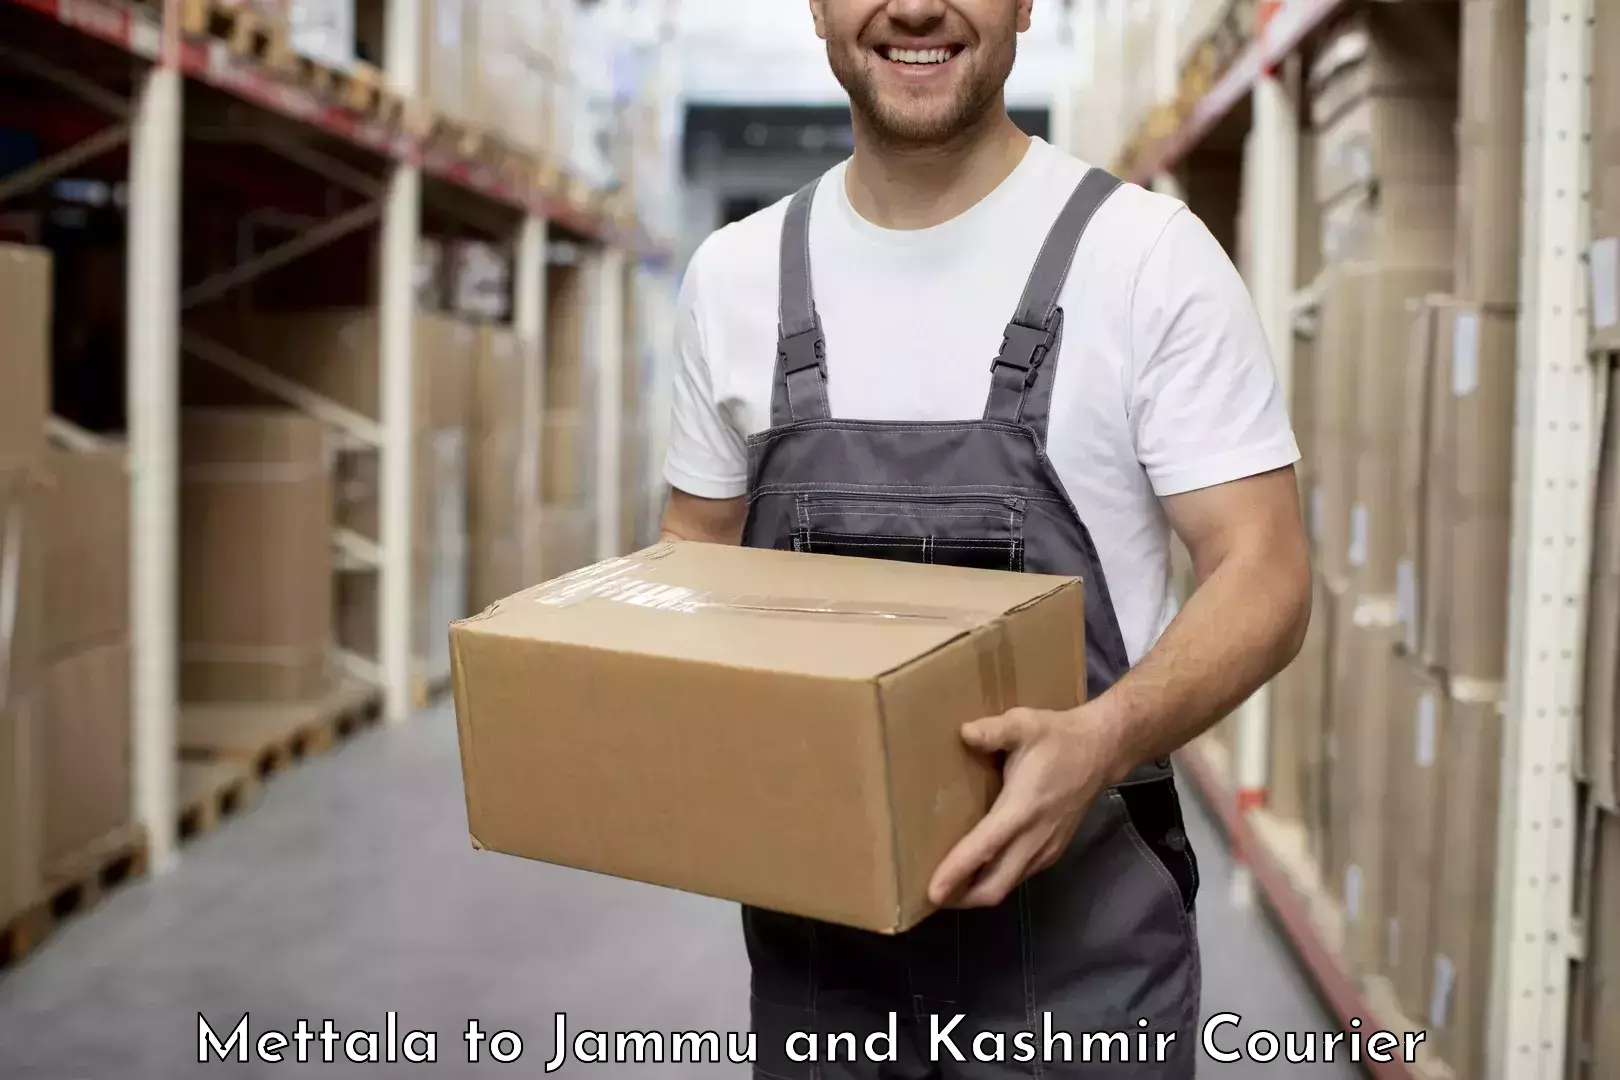 Courier service innovation Mettala to Udhampur